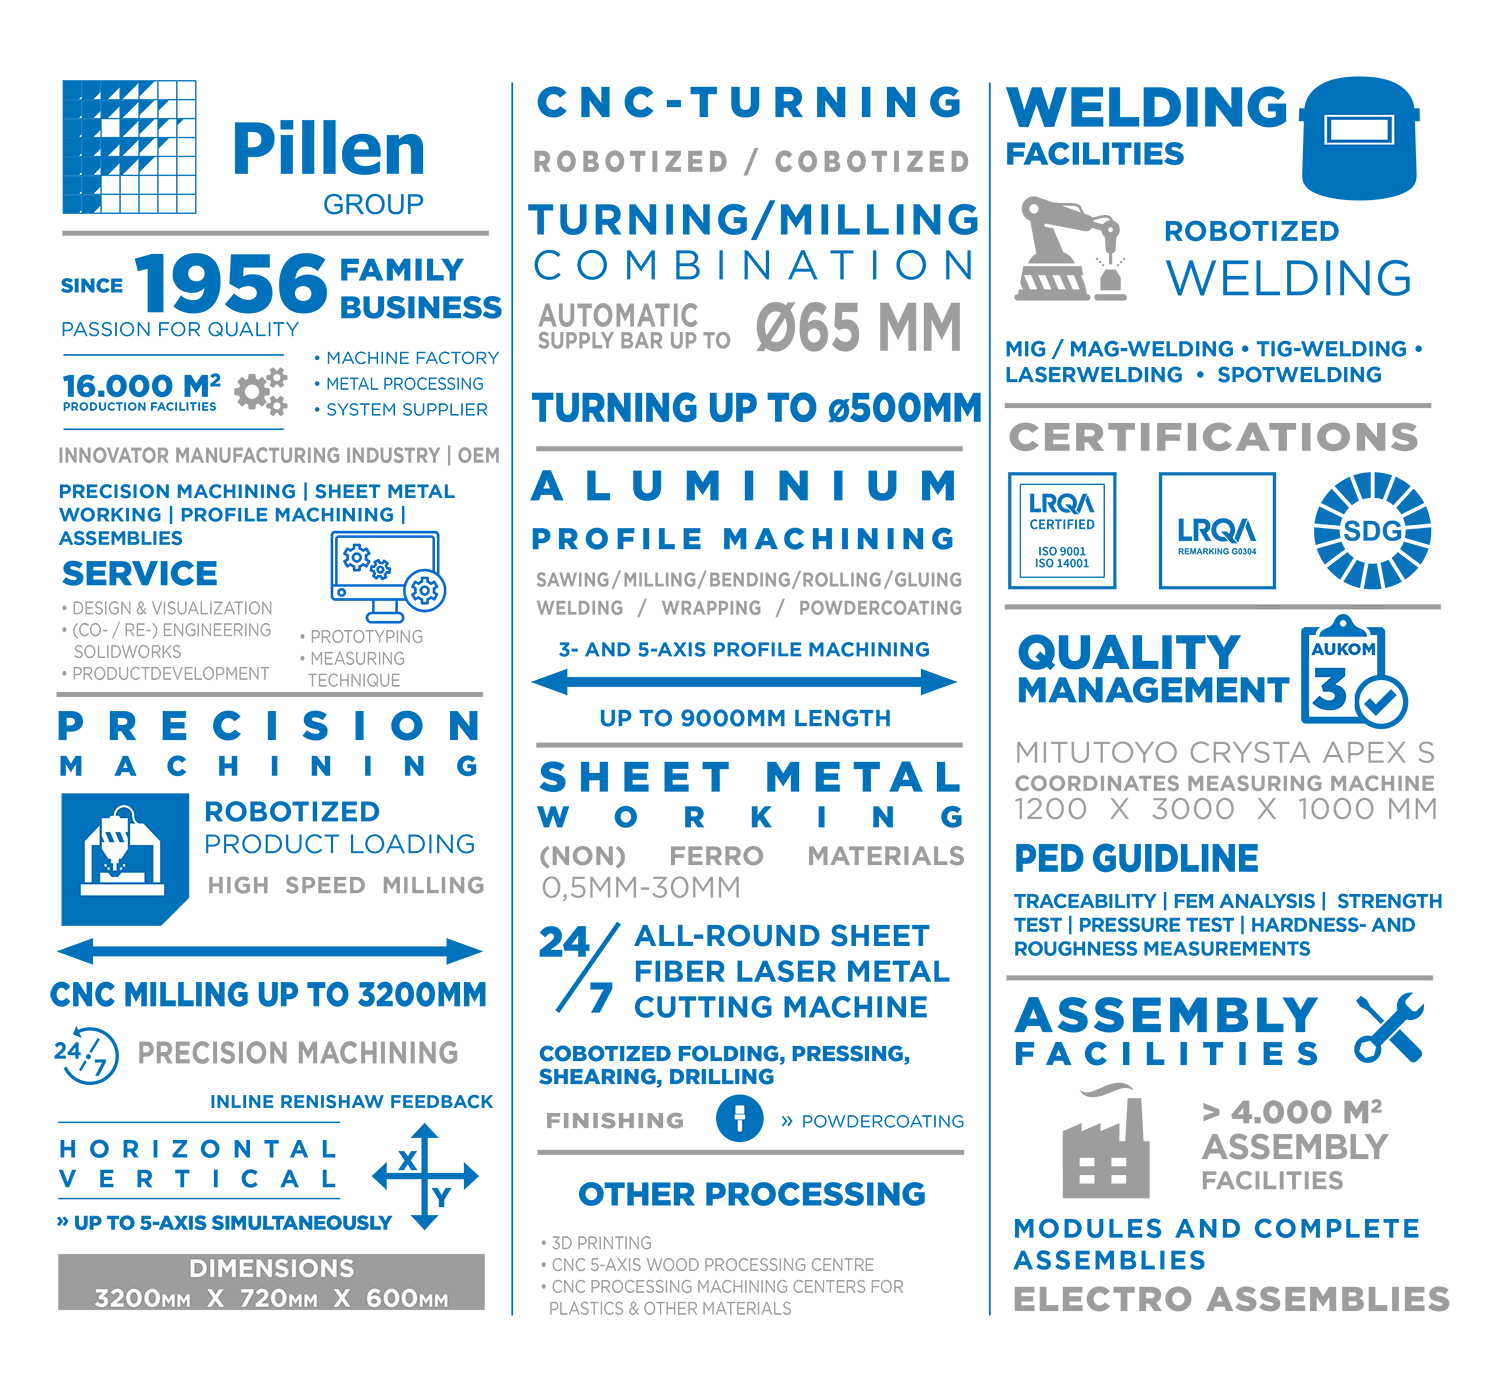 Pillen Group Factwall - the operations we perform are visualized at a glance.